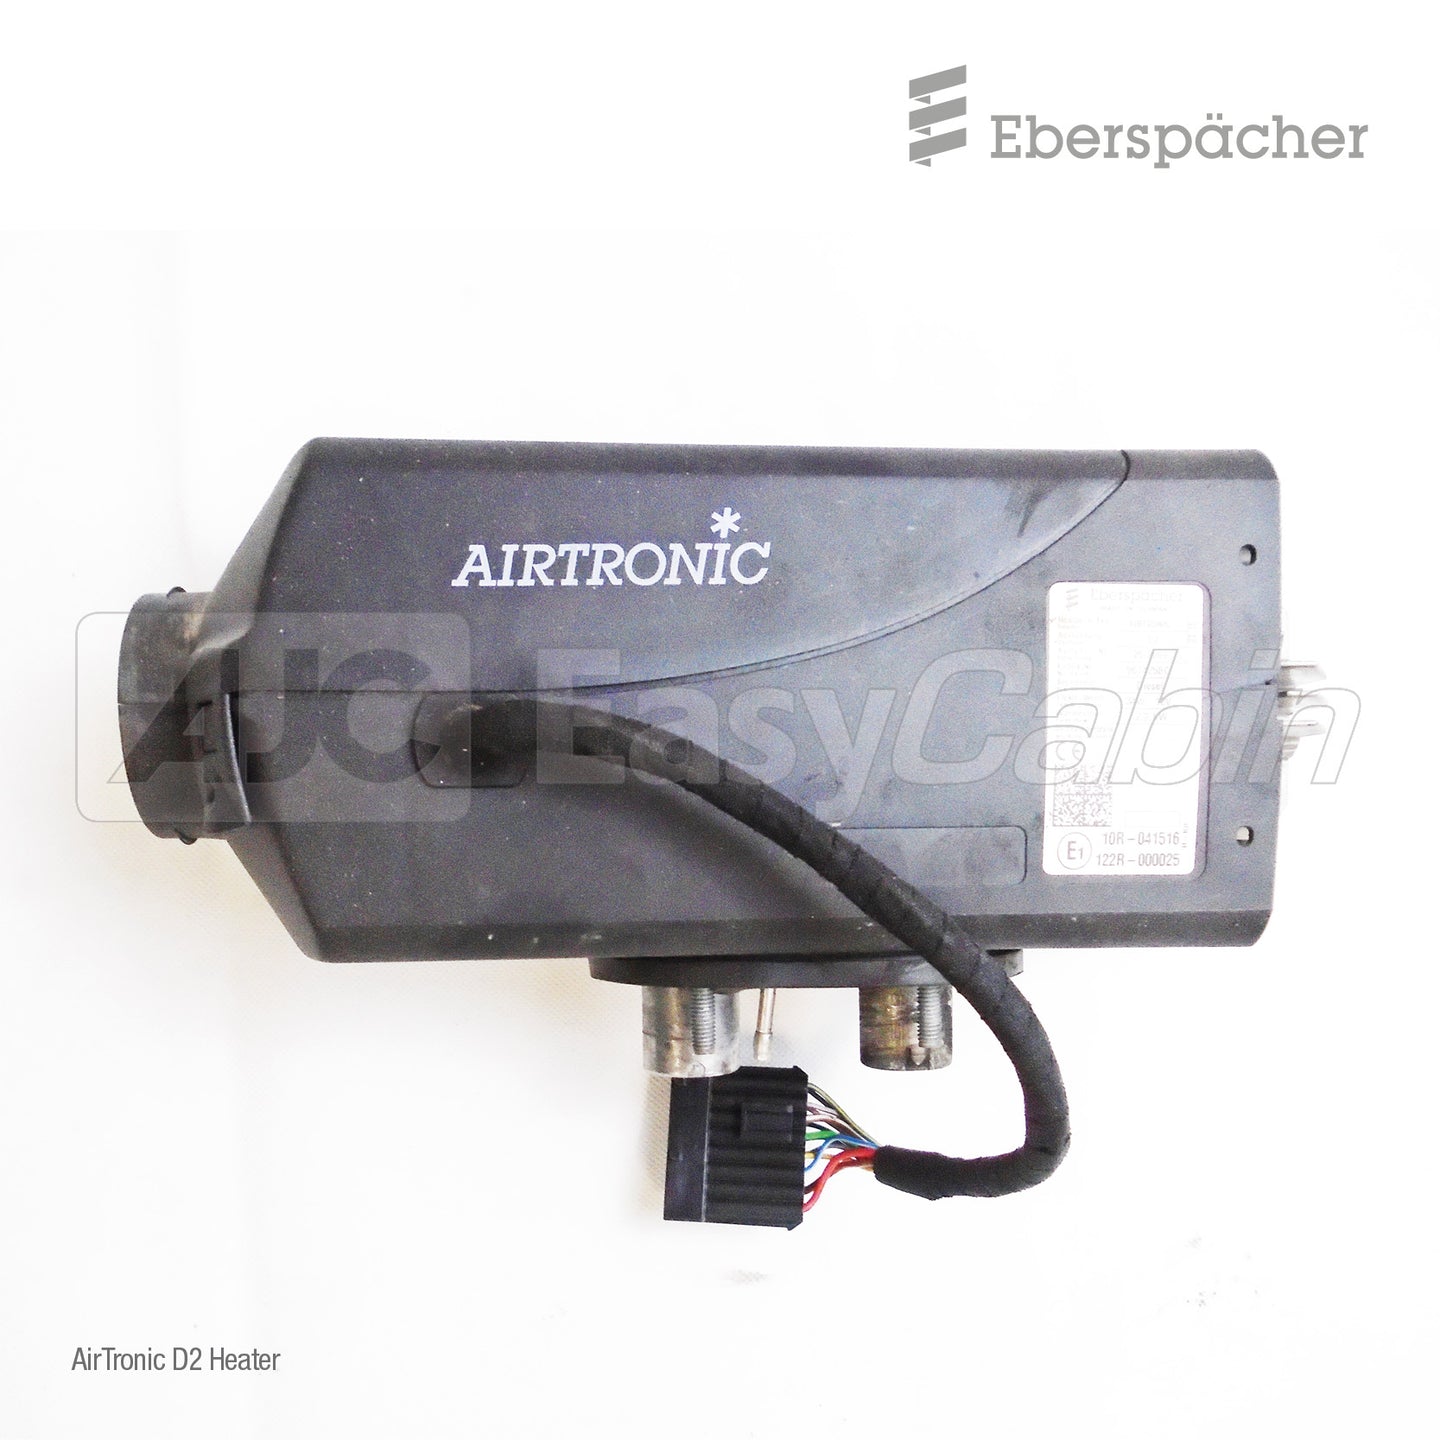 Airtronic D2 Heater